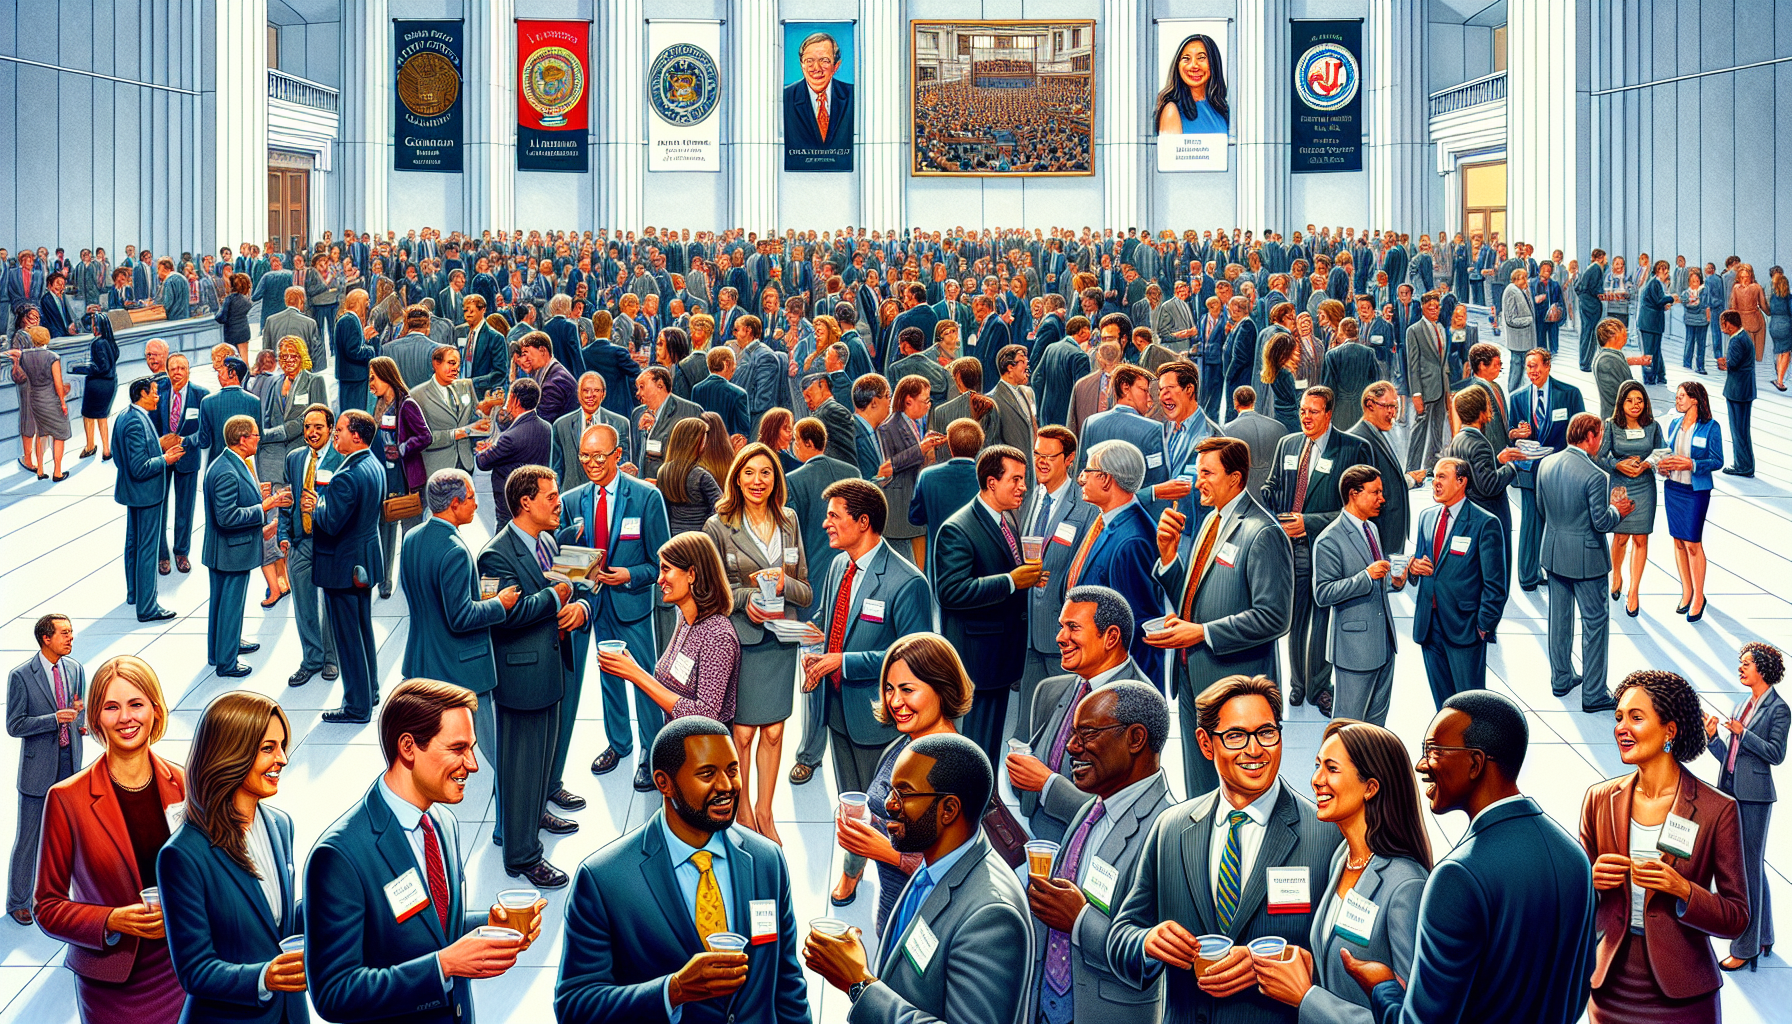 Illustration of professionals attending a legal event